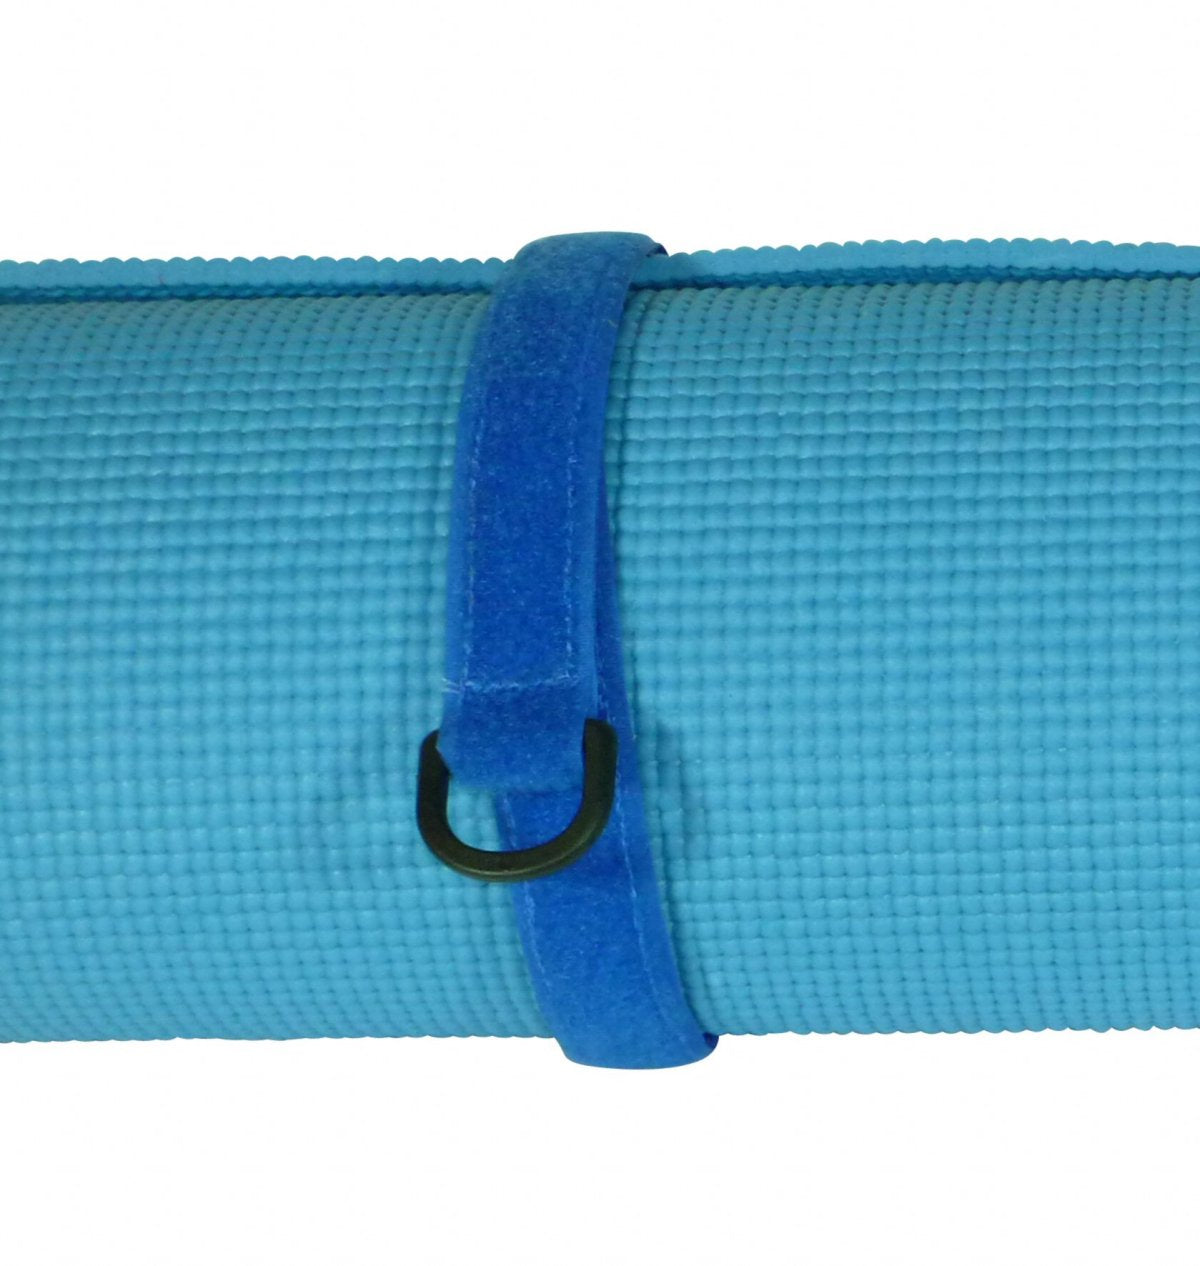 Benristraps 25mm back to back hook & loop strap in blue with D ring on mat